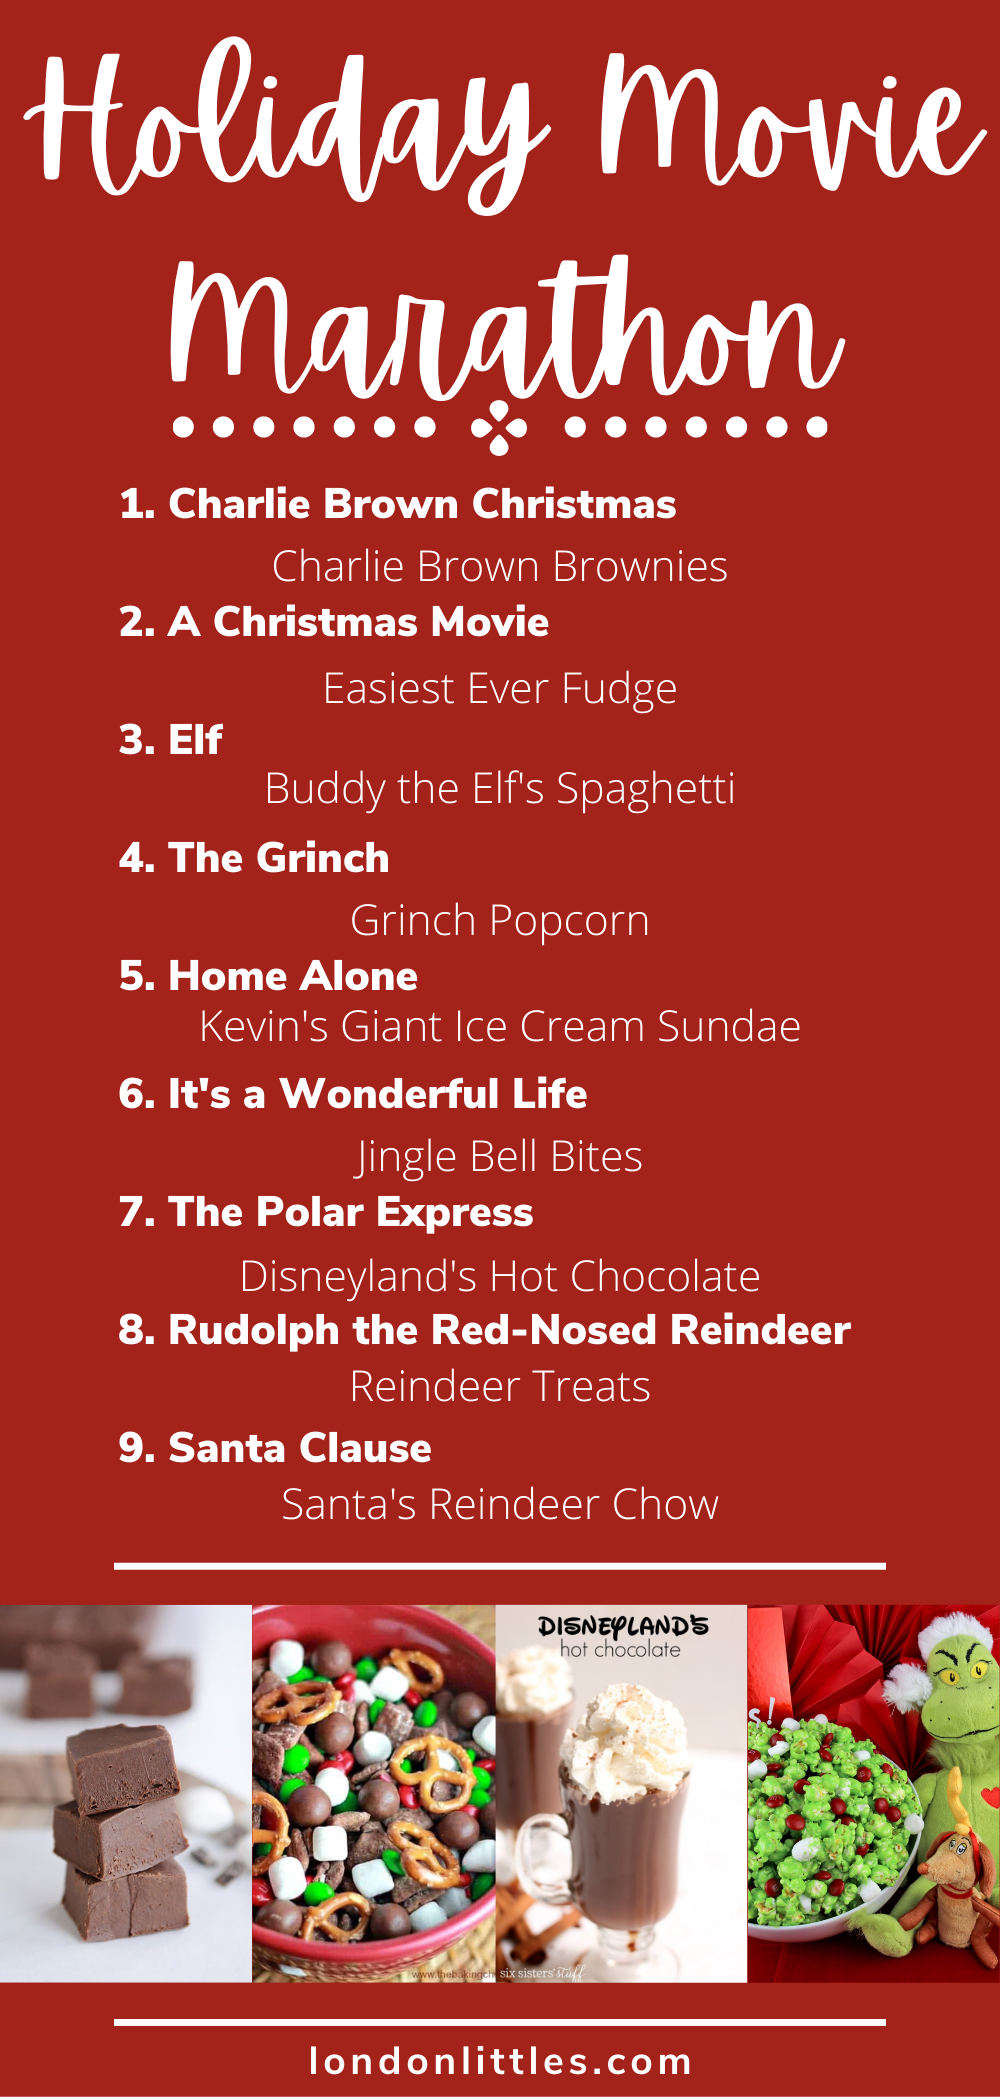 holiday movies for the family with treats